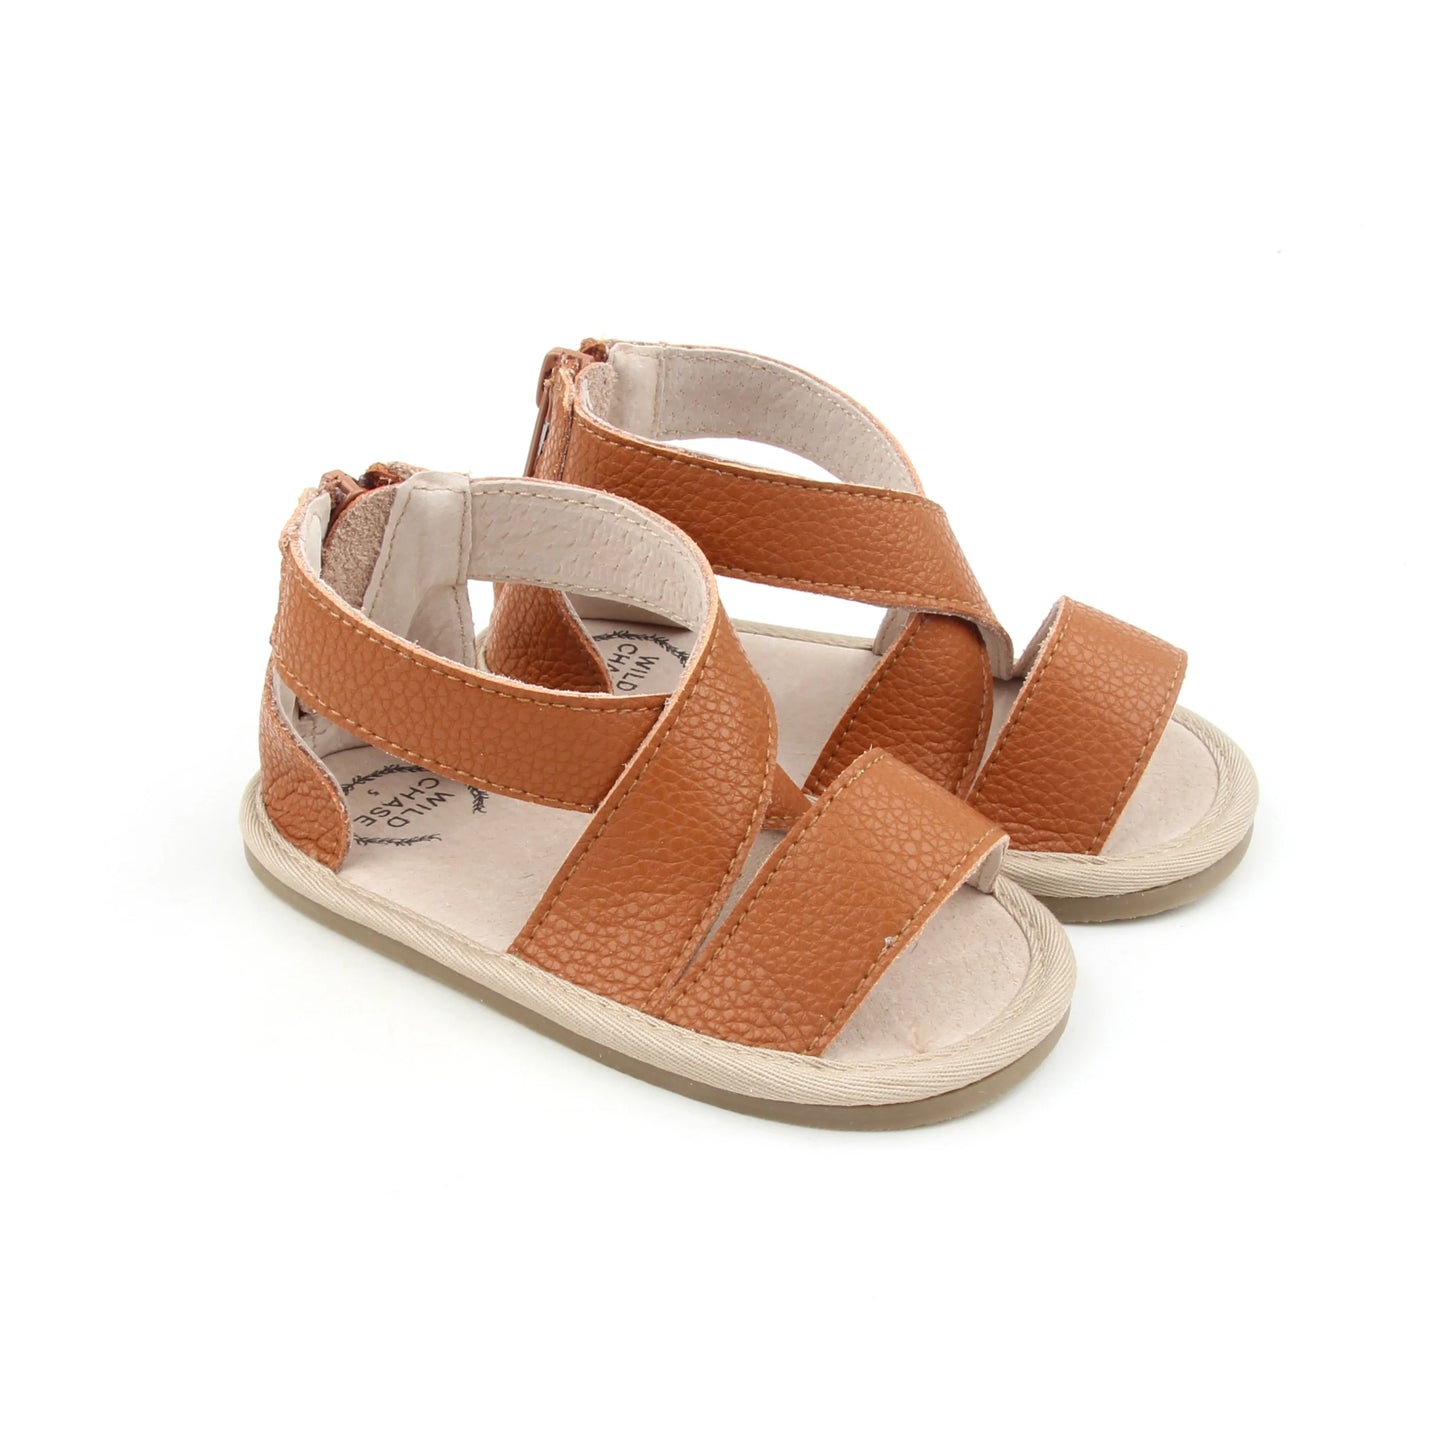 Baby Leather Sandals White, Pink or Tan